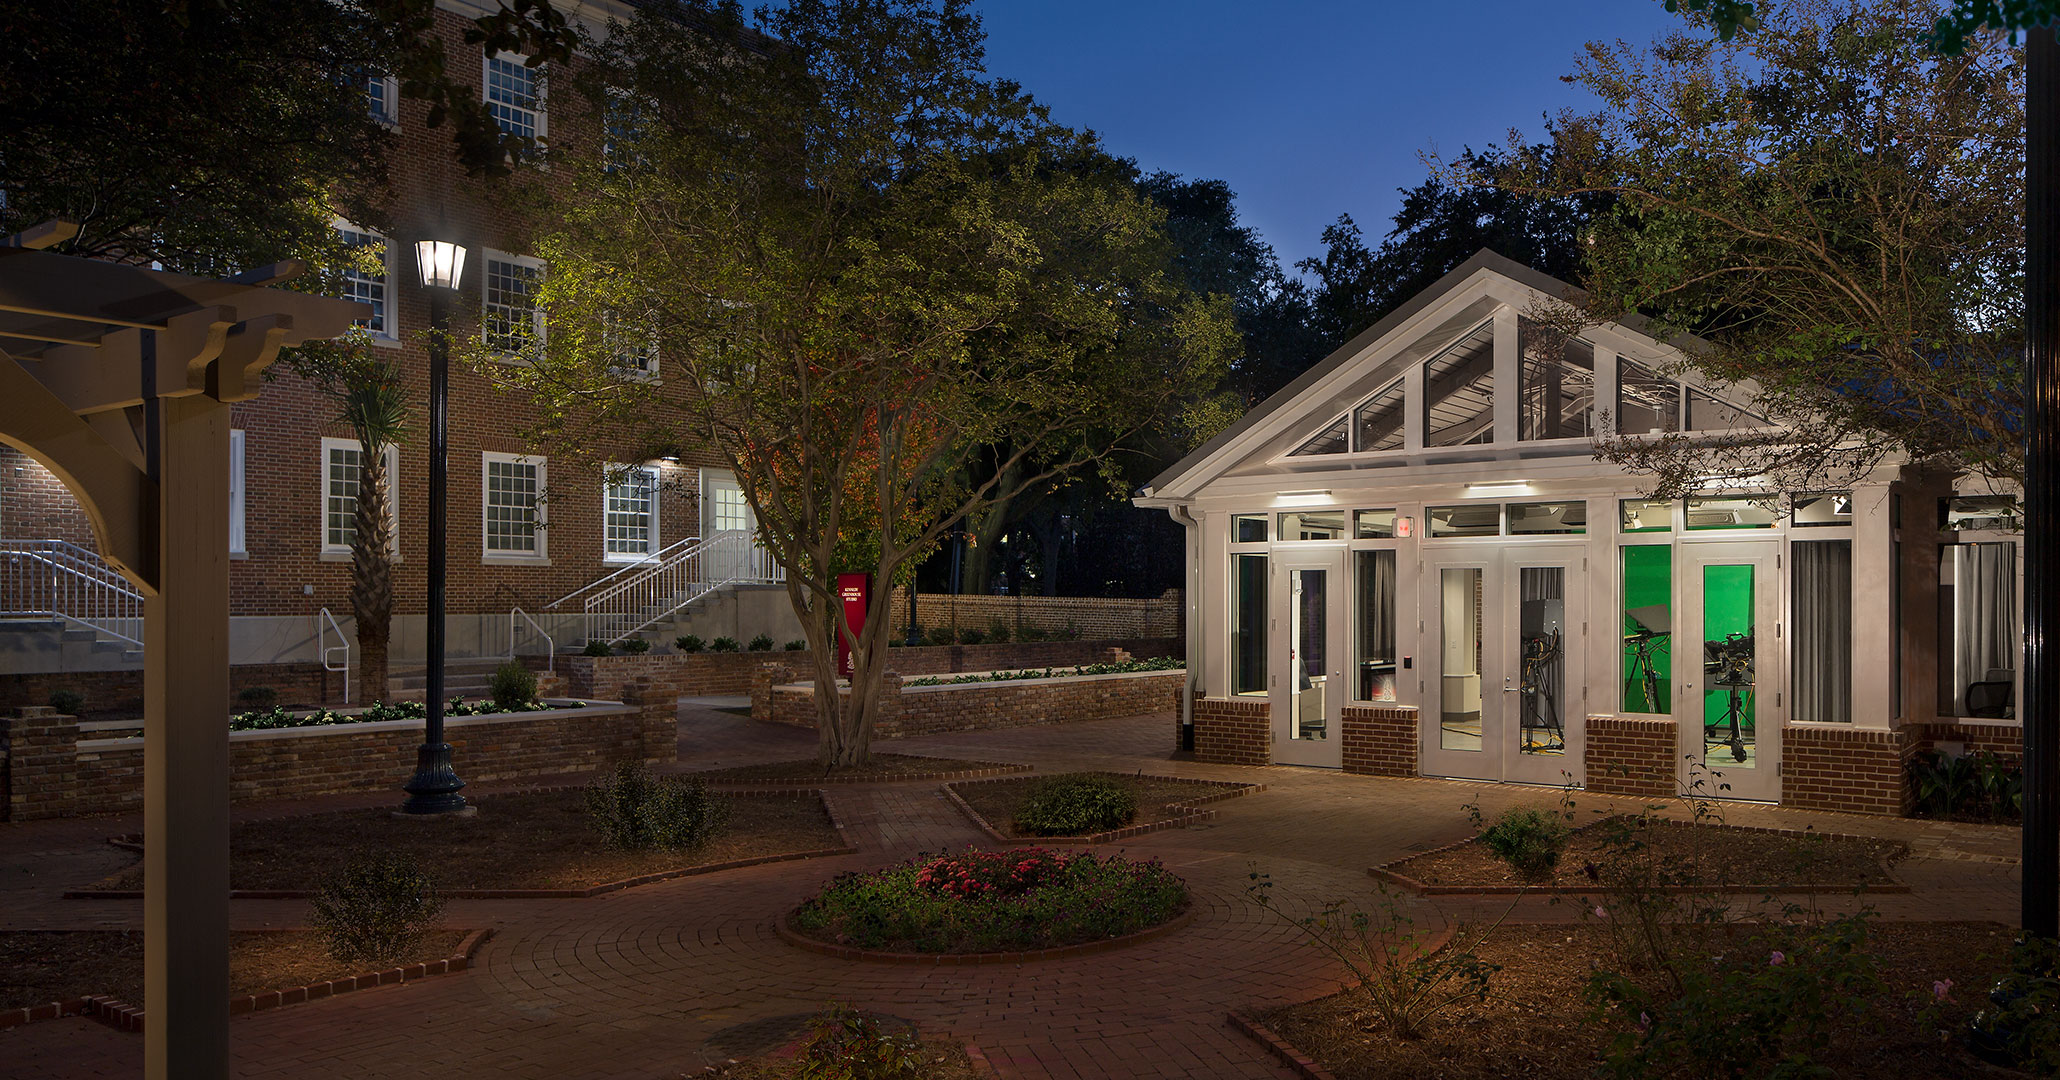 University of South Carolina worked with Boudreaux architects to design improvements to the historic property the Kennedy House.